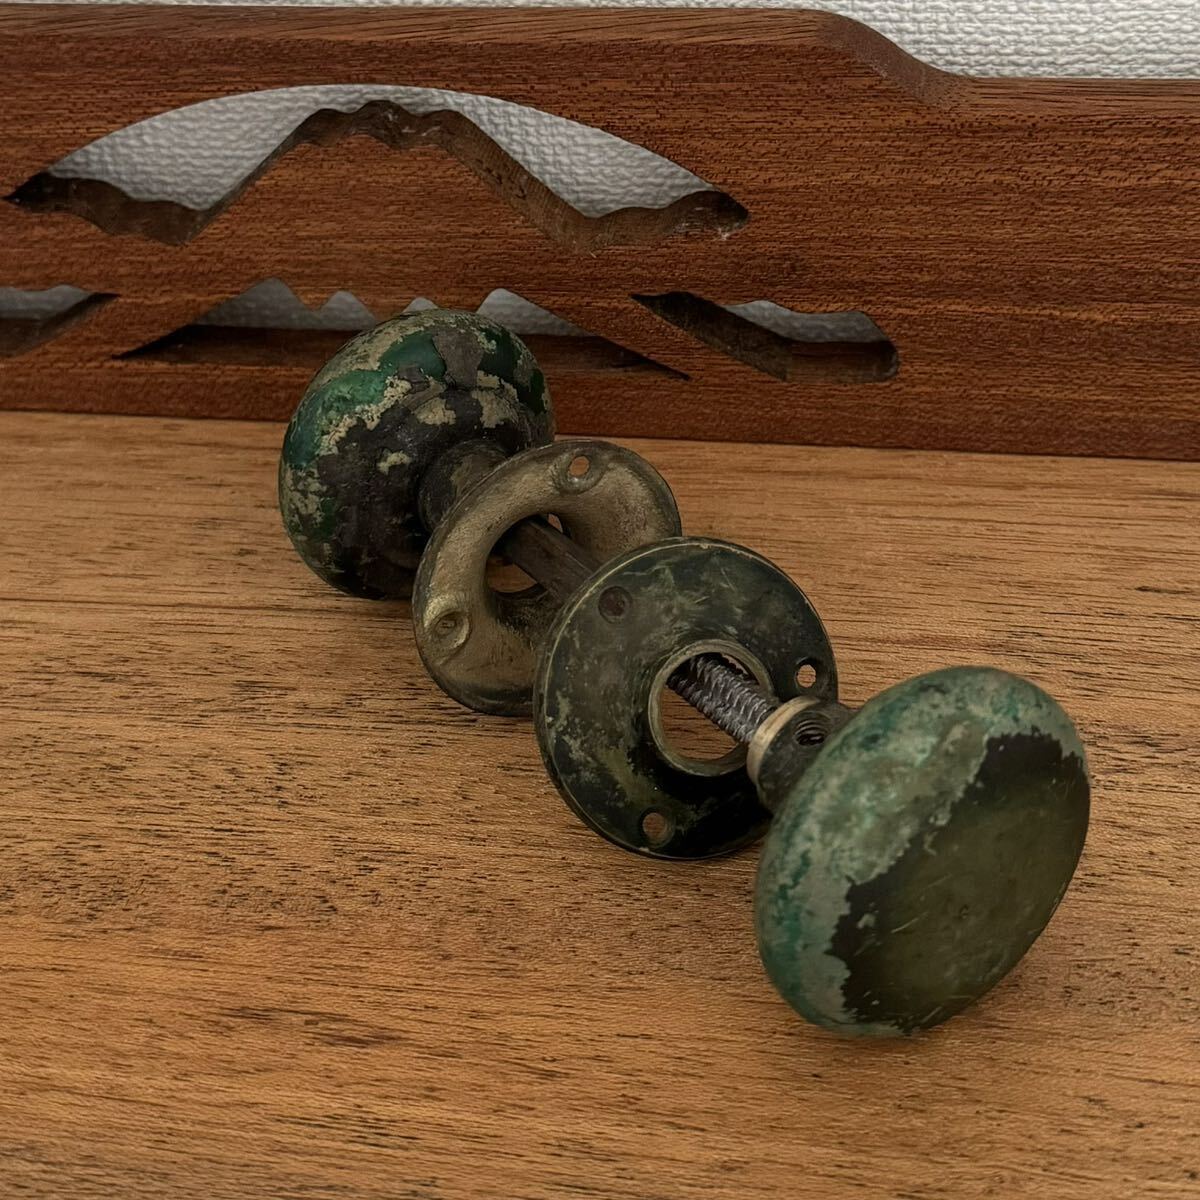  Showa Retro car Be . door knob cover old Japanese-style house DIY Vintage antique made of metal ... sphere handle that time thing Shabby Chic vintage